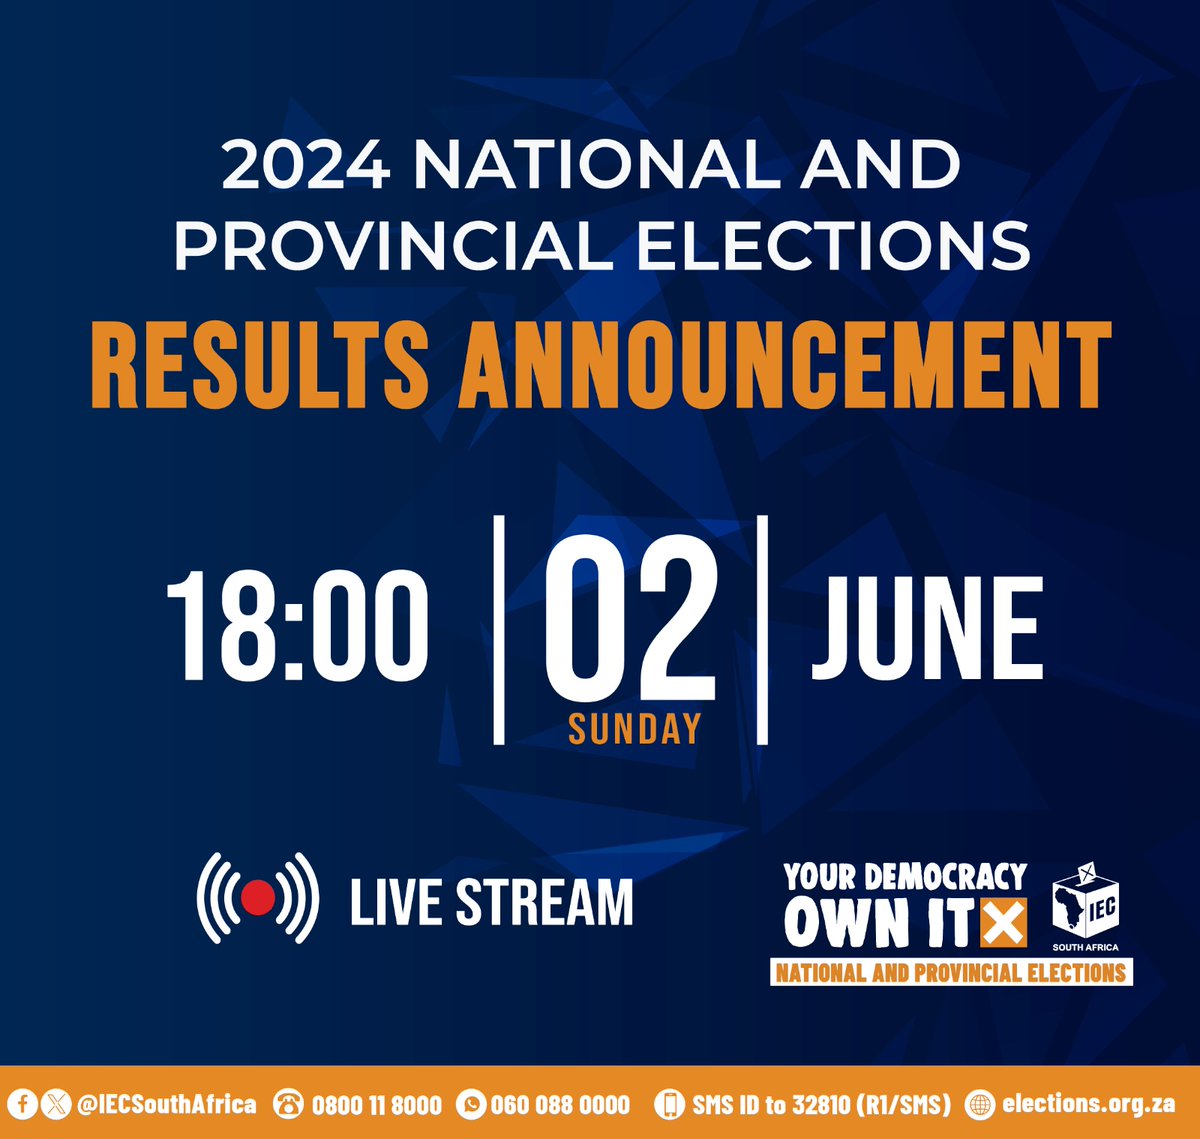 🚨 Election Results Announcement 🚨

The Electoral Commission of South Africa will announce the results of the 2024 National and Provincial Elections TODAY!

📅 Date: 2 June 2024
🕒 Time: 18h00

Follow the live stream on Facebook, X (formerly Twitter), and YouTube